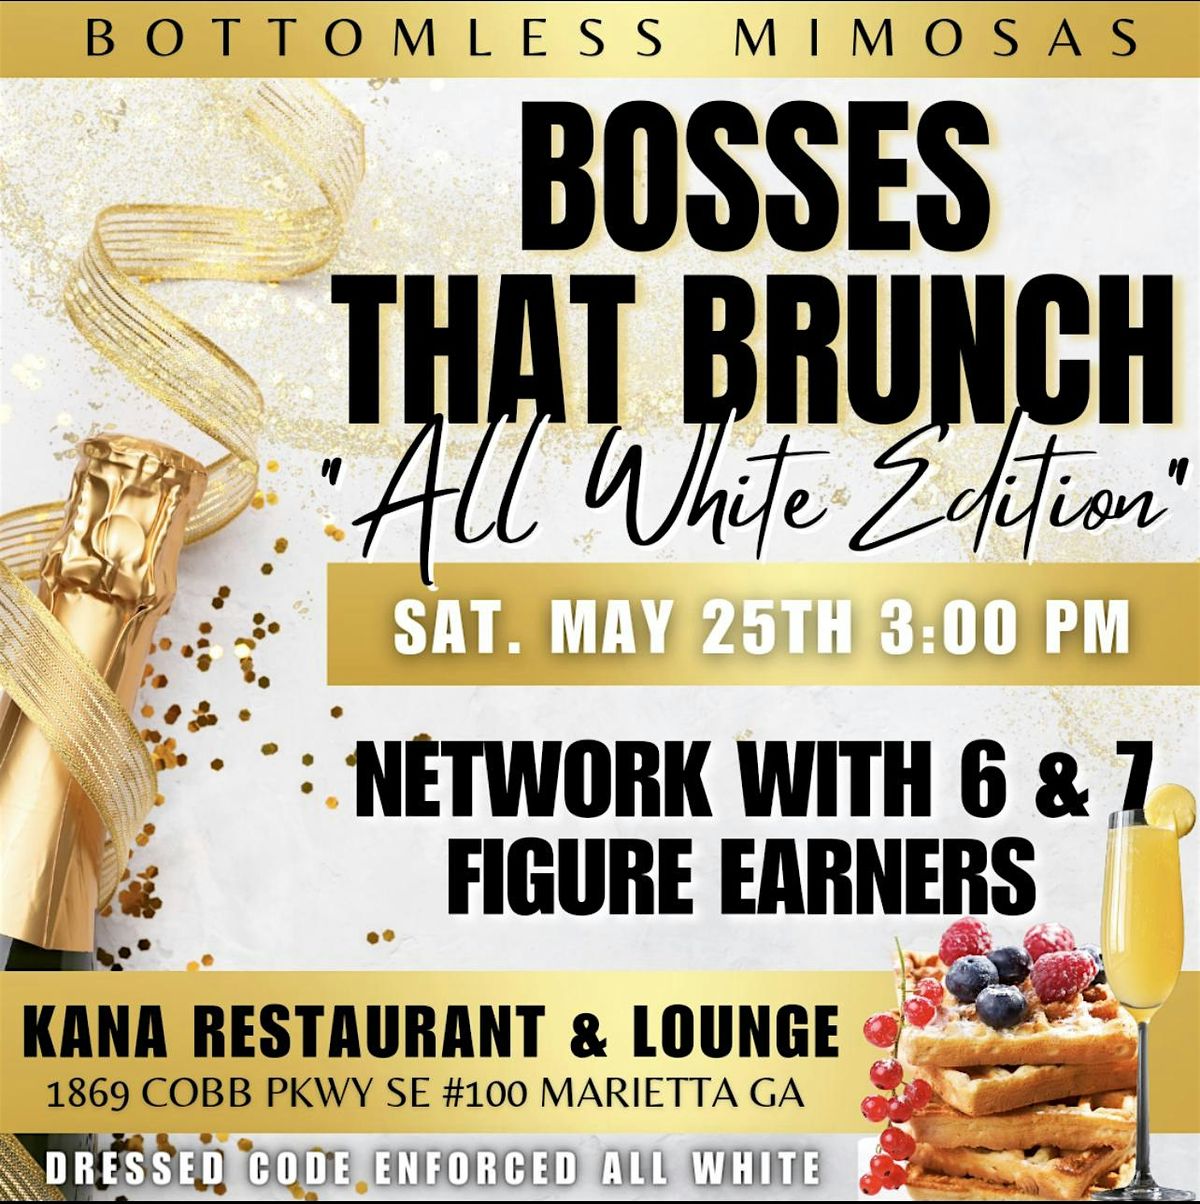 BOSSES THAT BRUNCH LETS TALK BUSINESS AND CREDIT